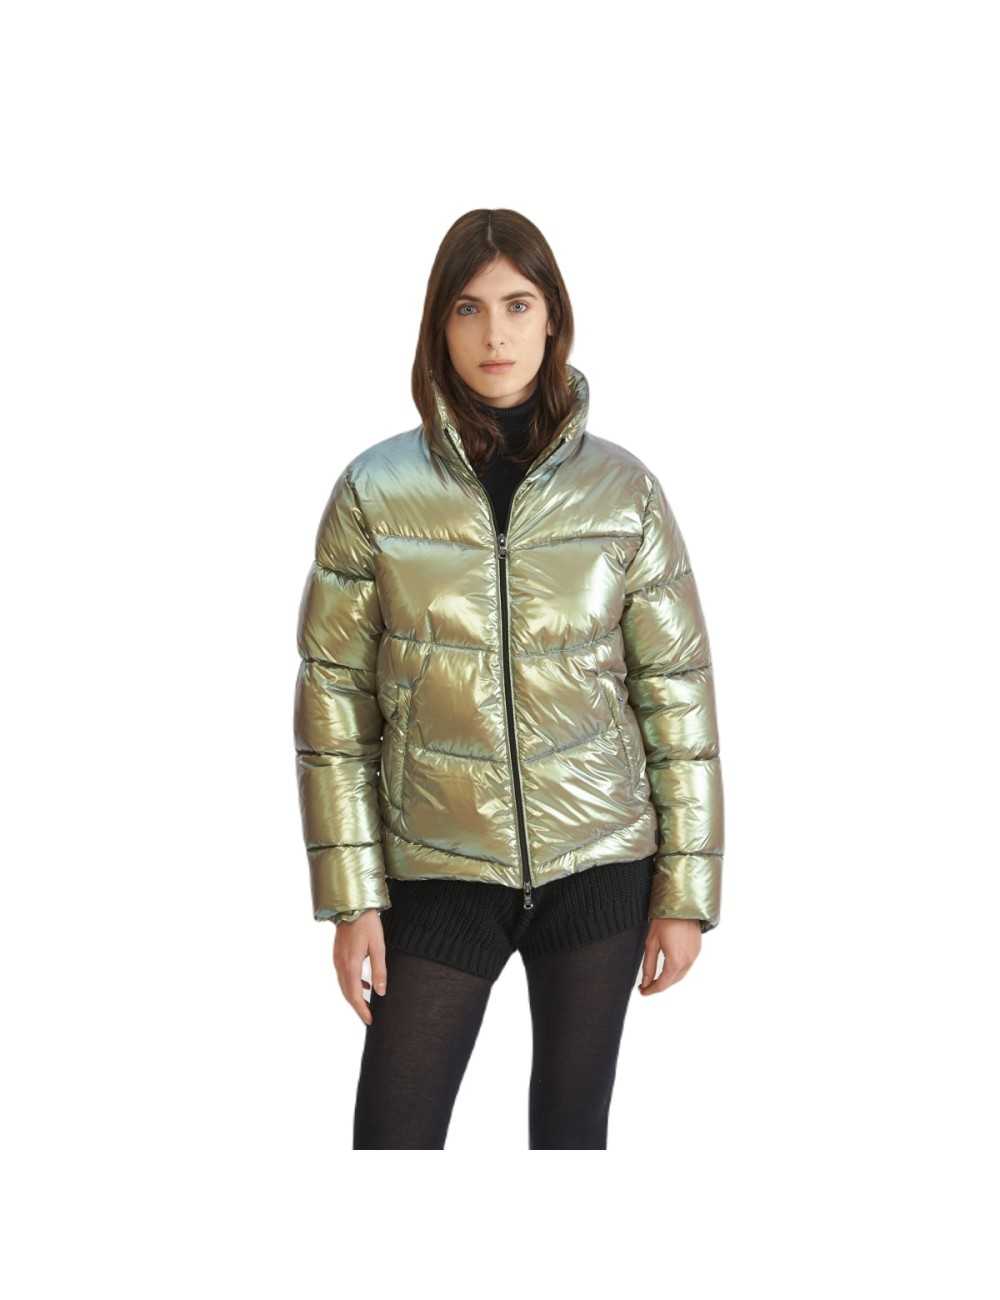 Canadian giacca donna Mauricie Recycled Glamour Bronzo - Giacche & Cappotti Donna